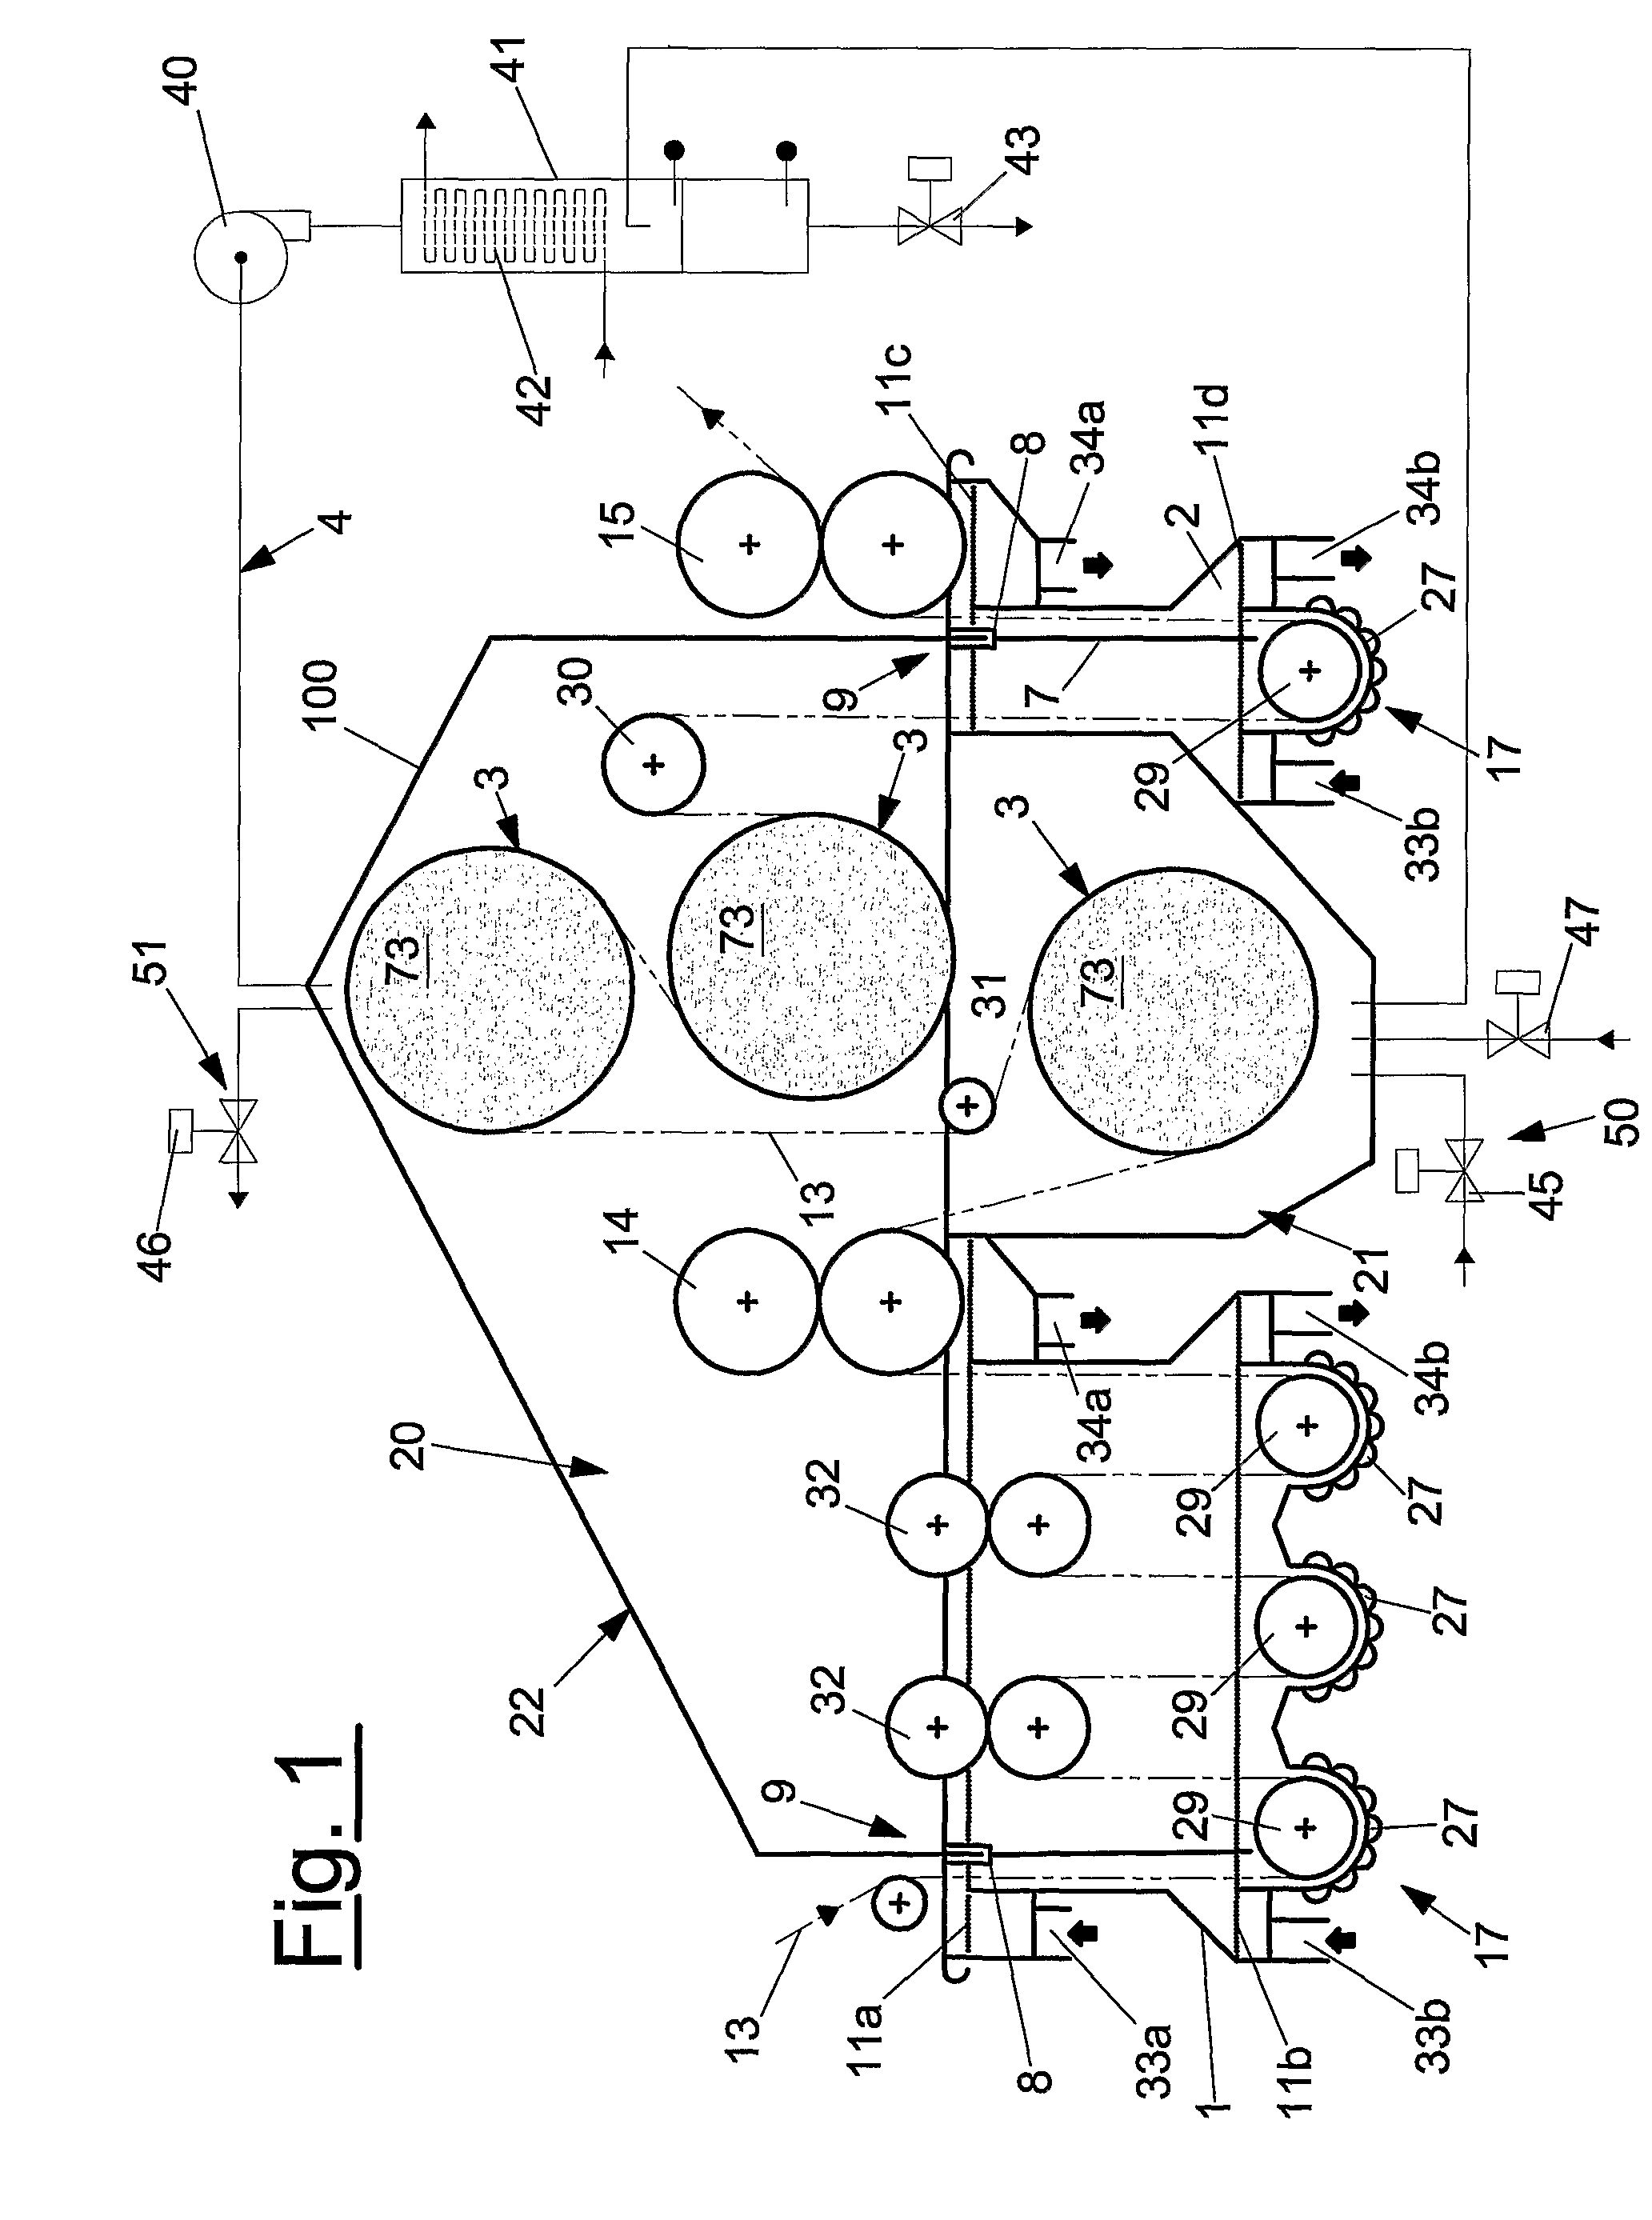 Dyeing device and process using indigo and other colorants